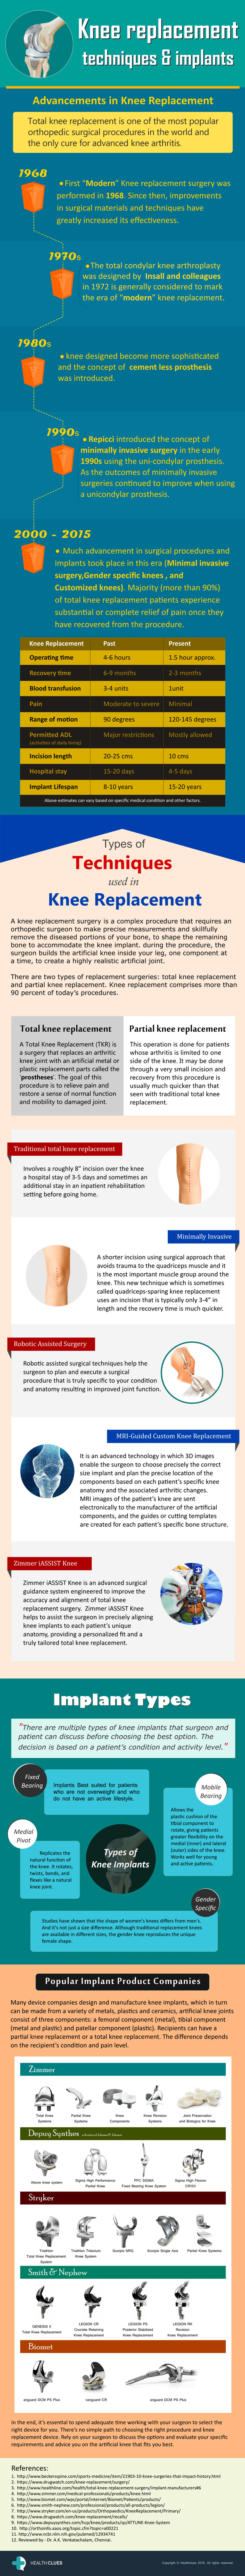 Latest Technology in Knee Replacement Surgery Infographic